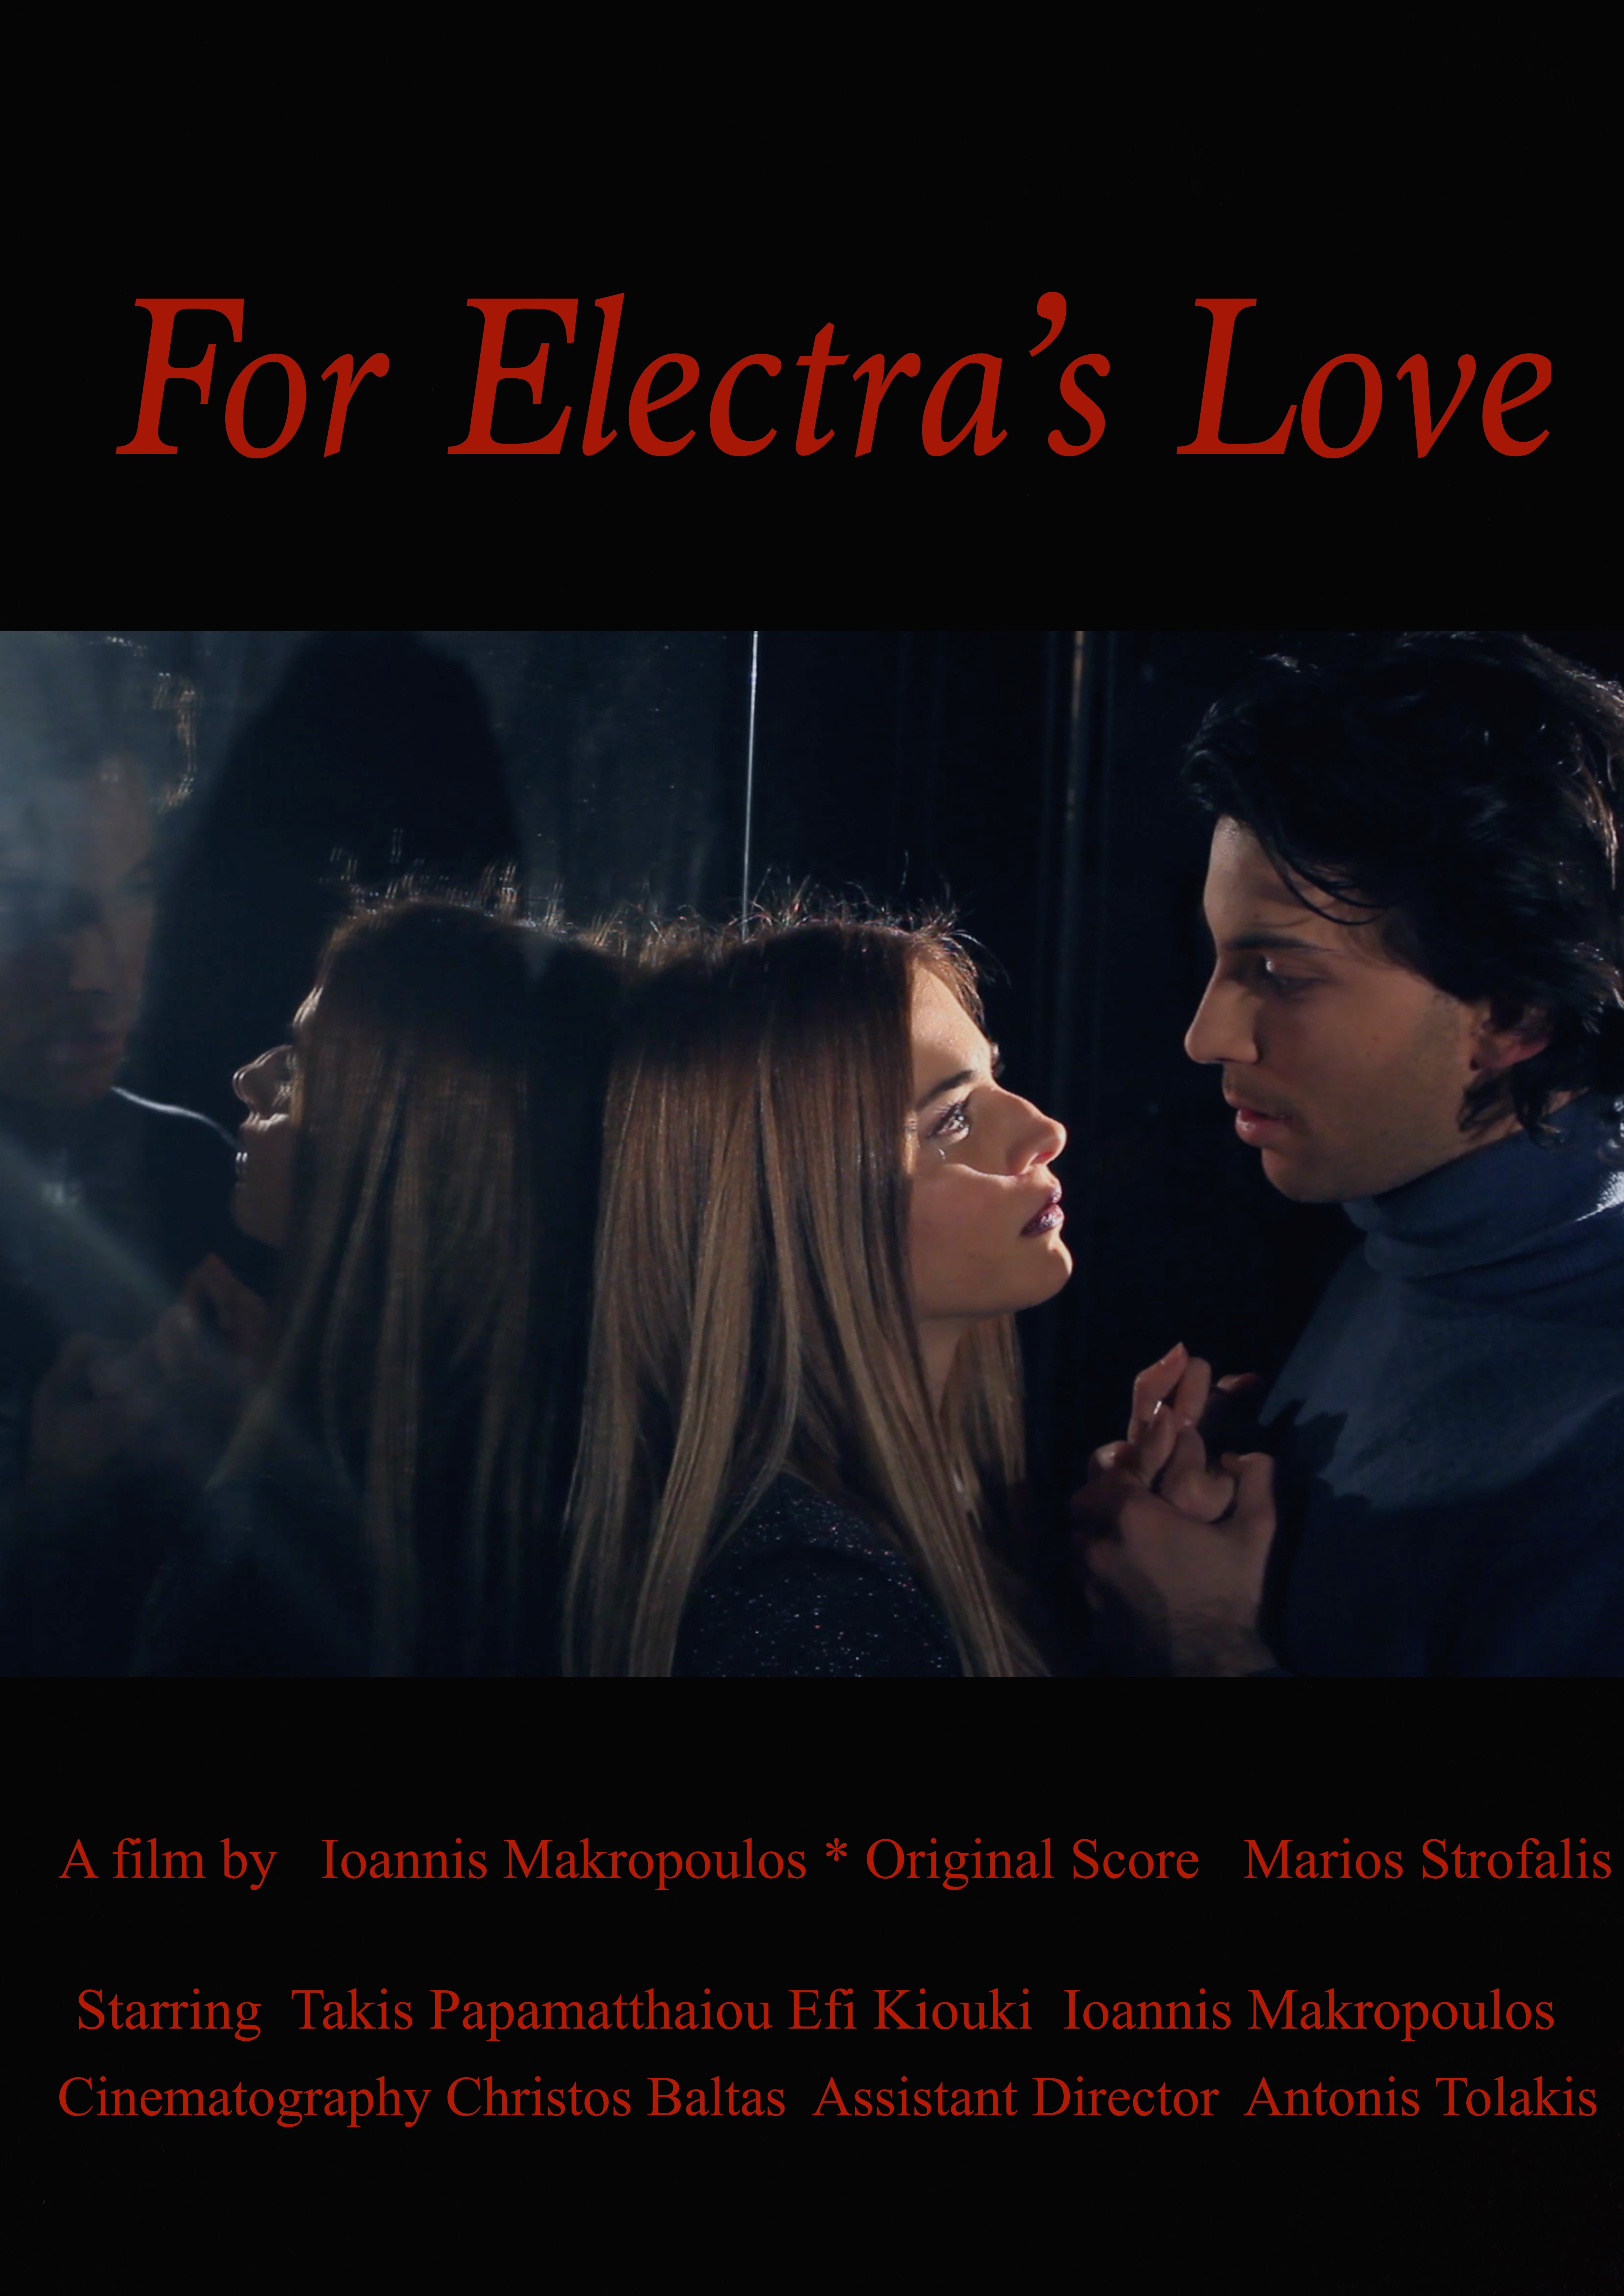 For Electra's Love